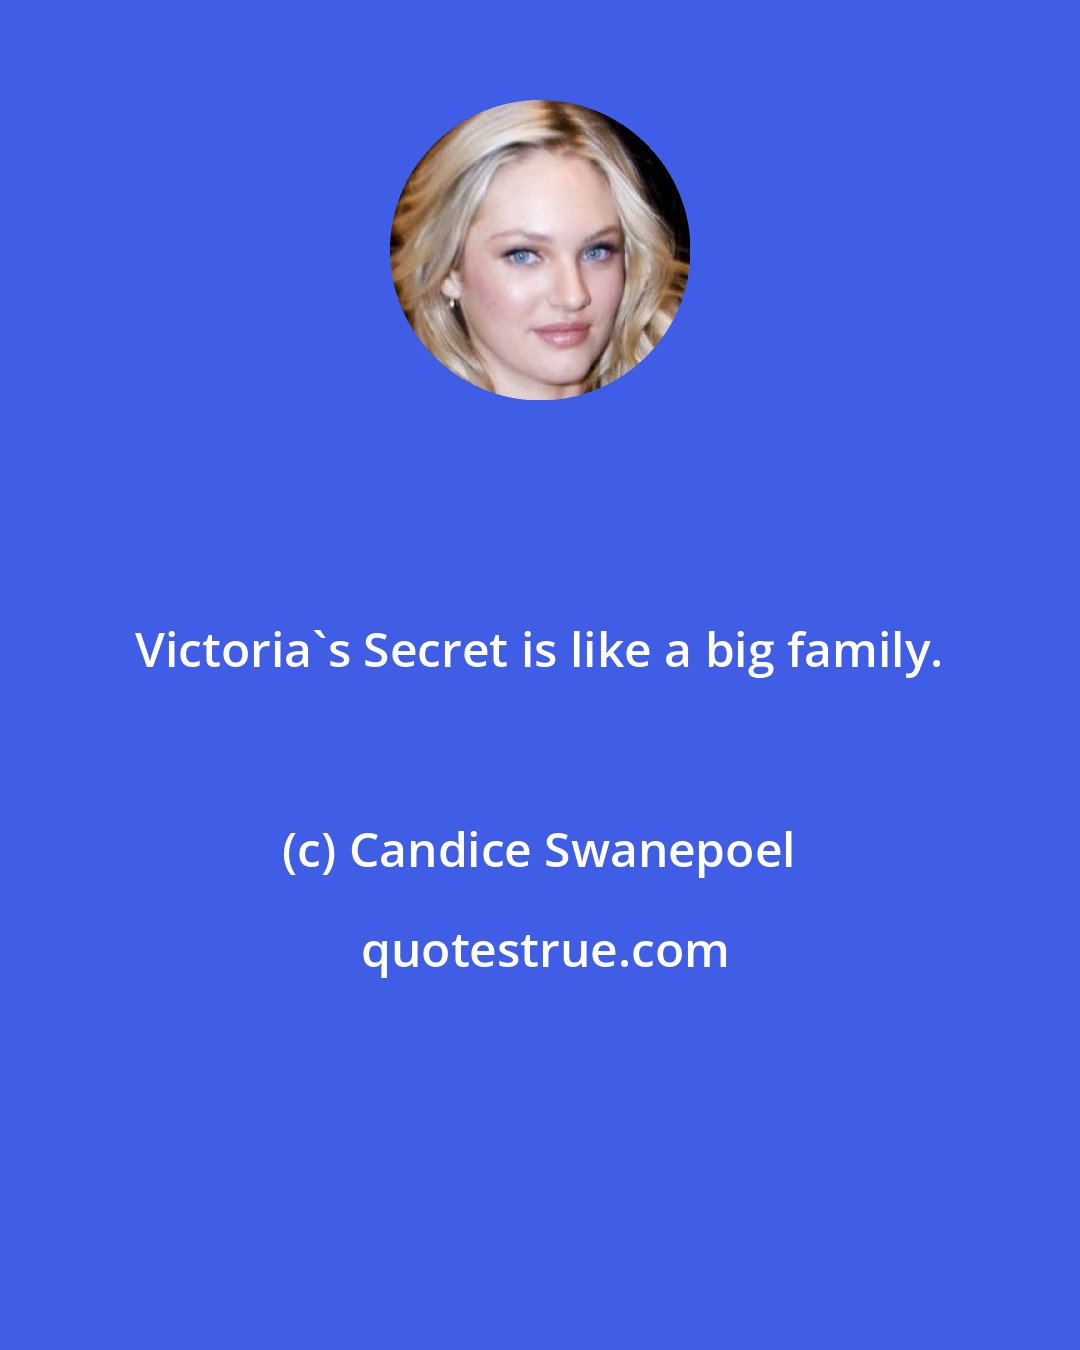 Candice Swanepoel: Victoria's Secret is like a big family.